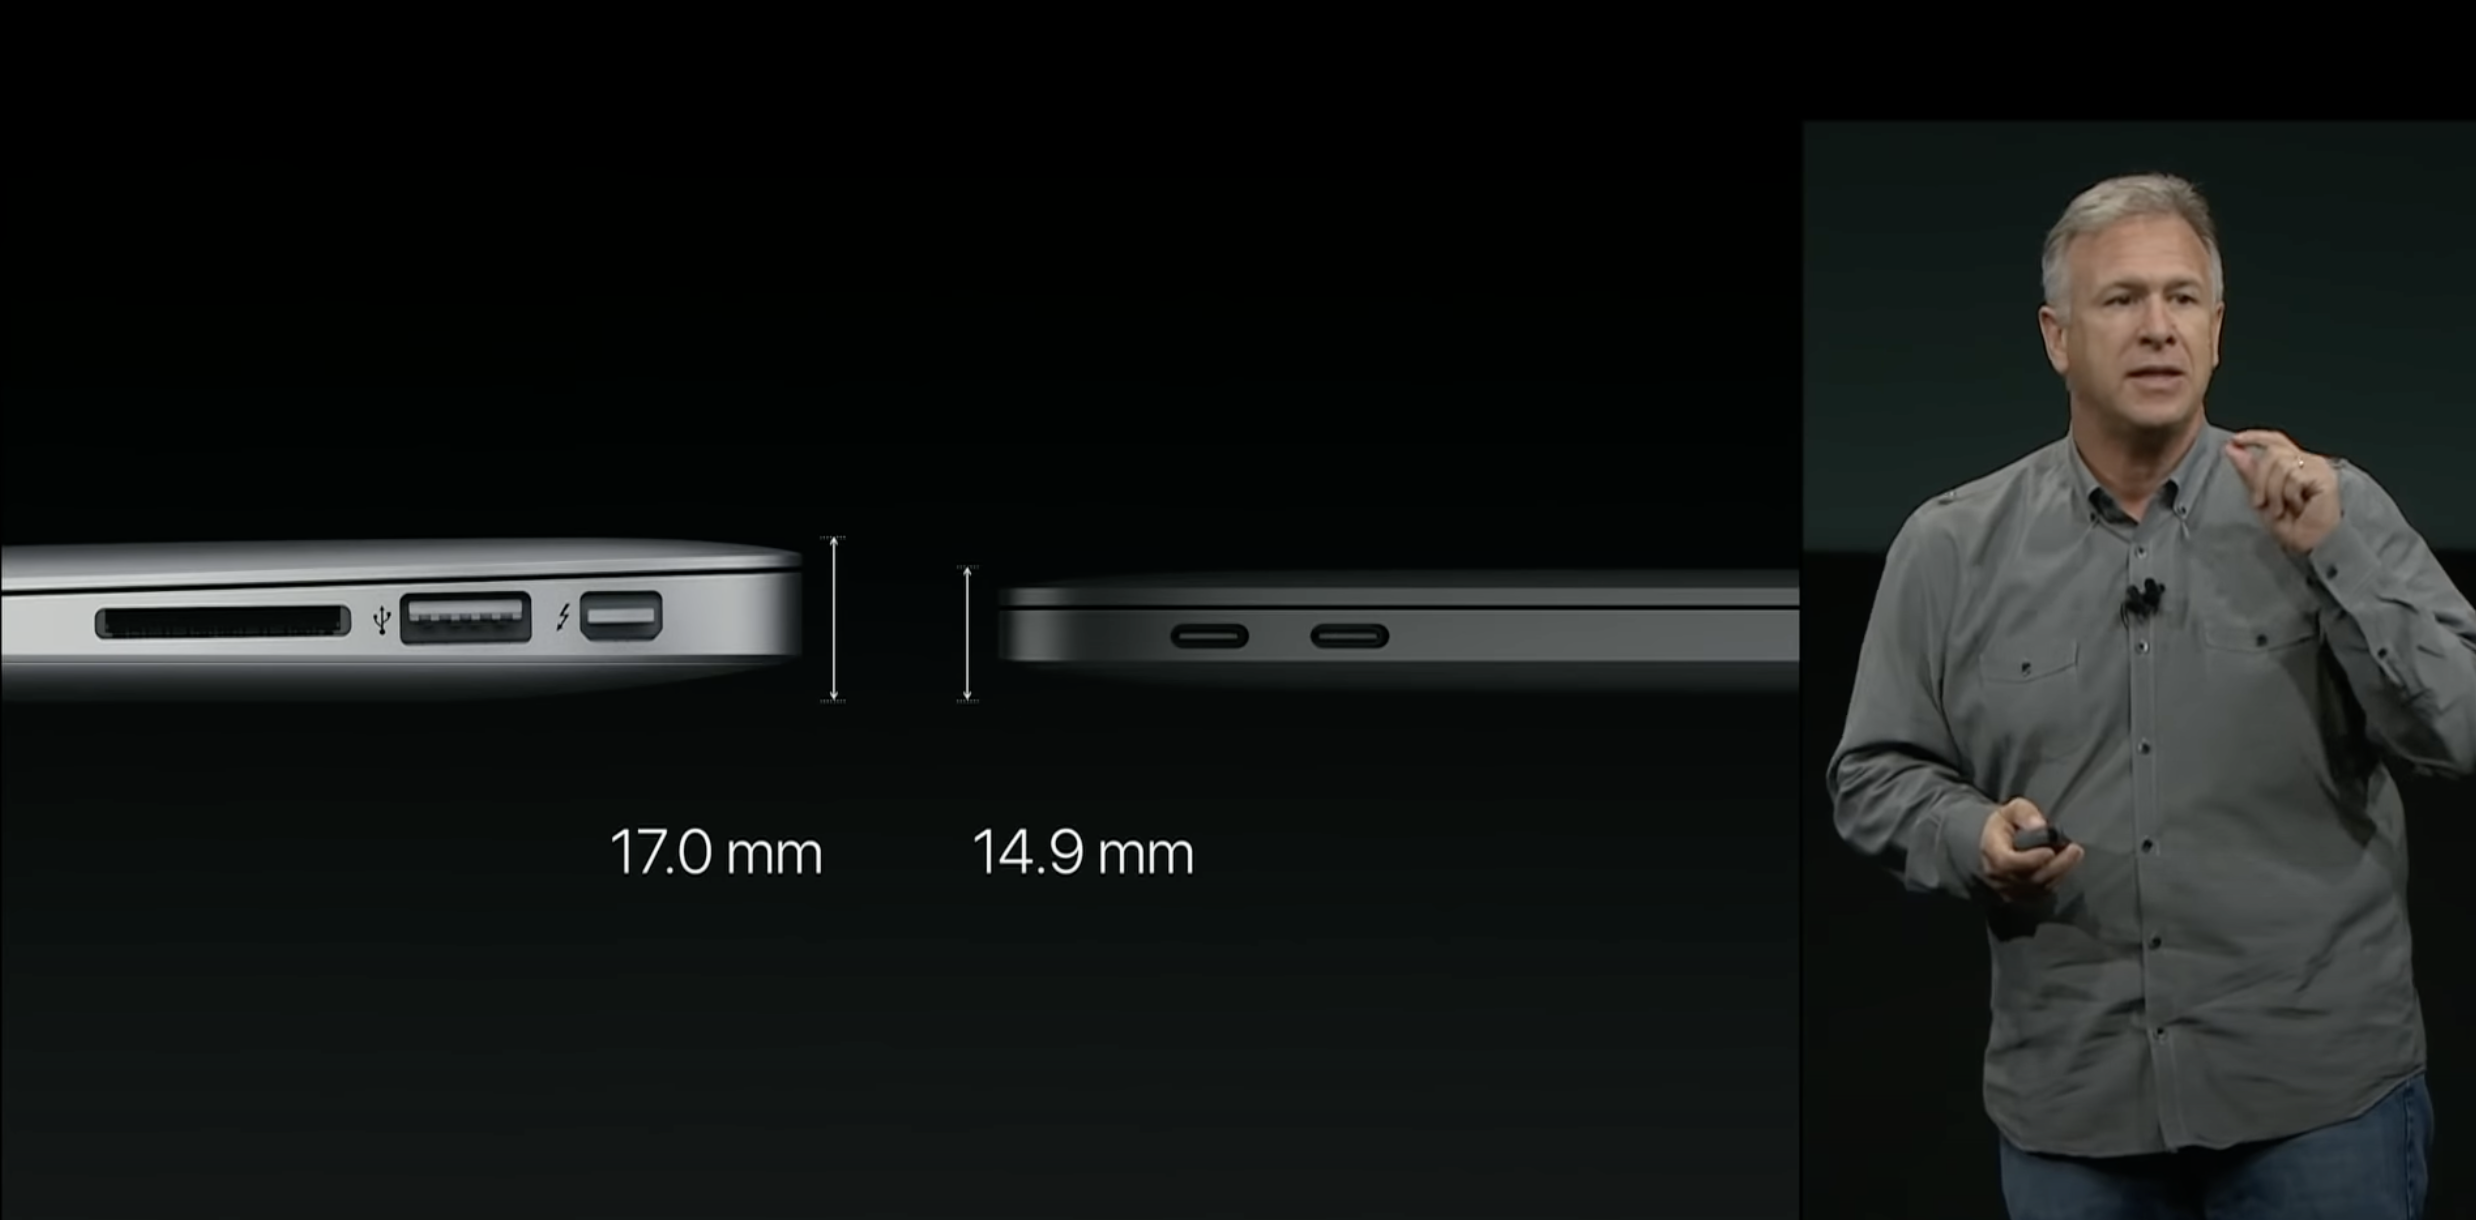 Thickness of the pre-retina MacBook Air and 2016 MacBook Pro